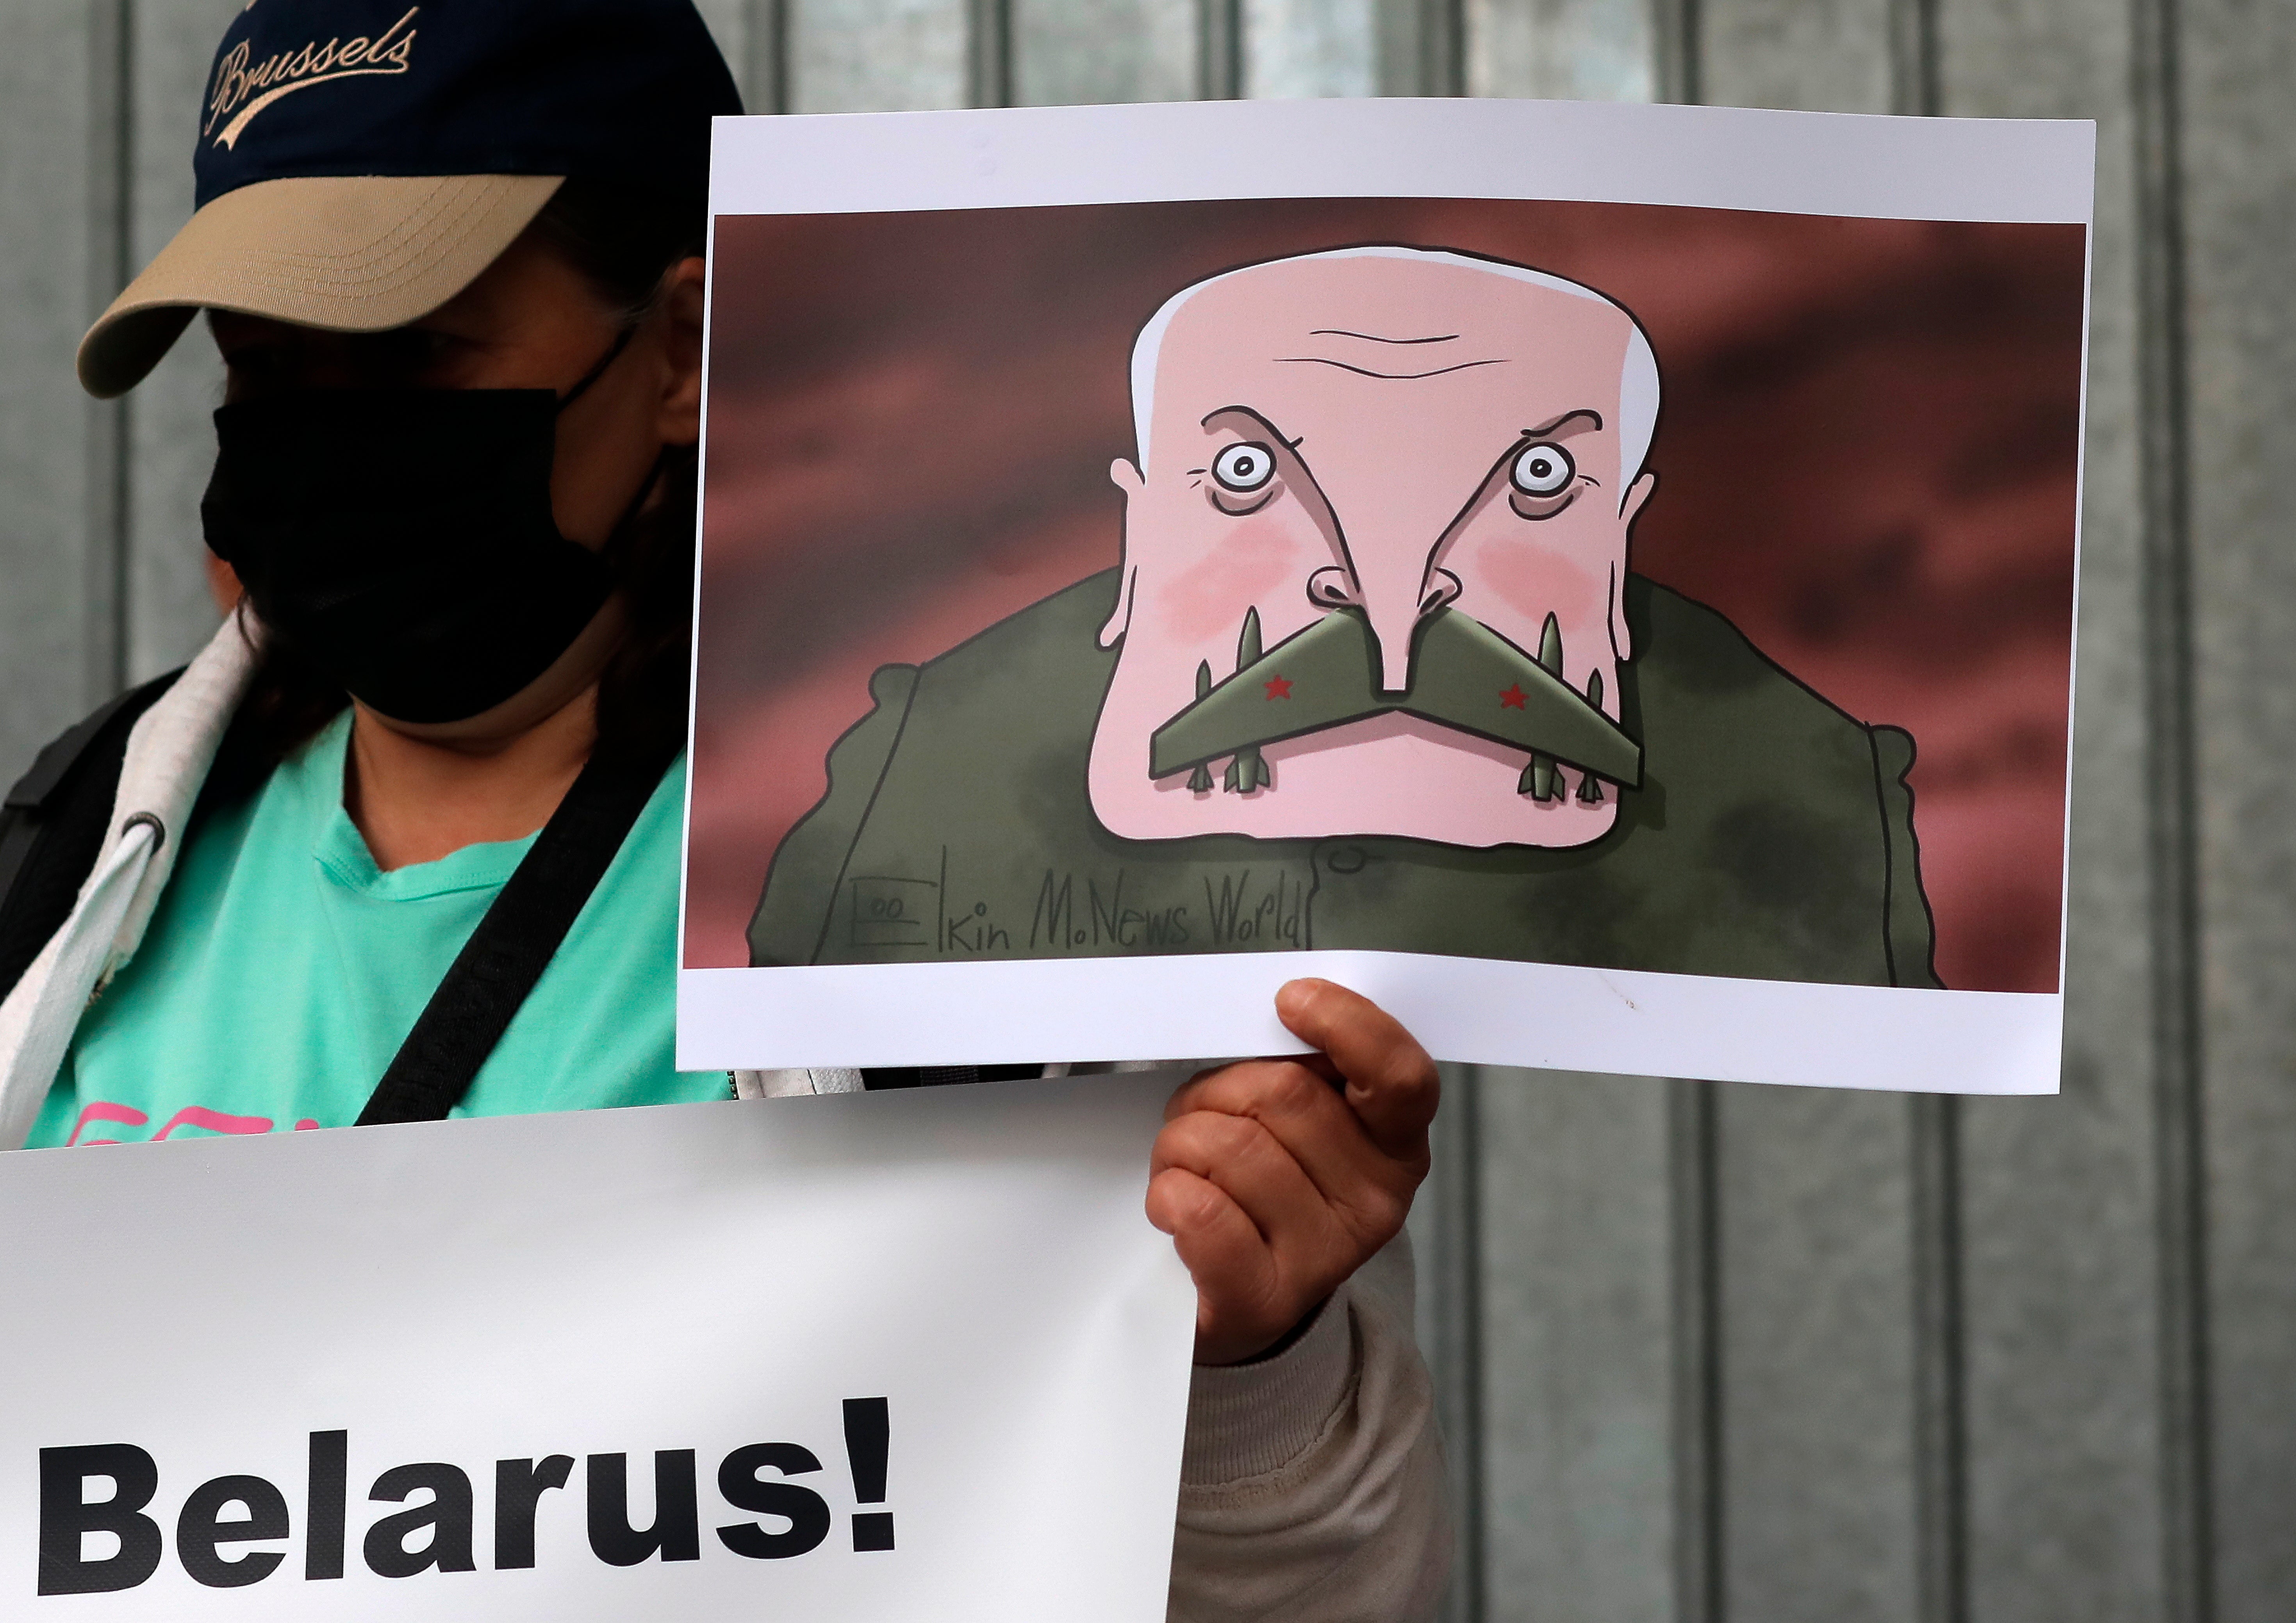 A civil rights activist holds a placard depicting a cartoon of the Belarusian president